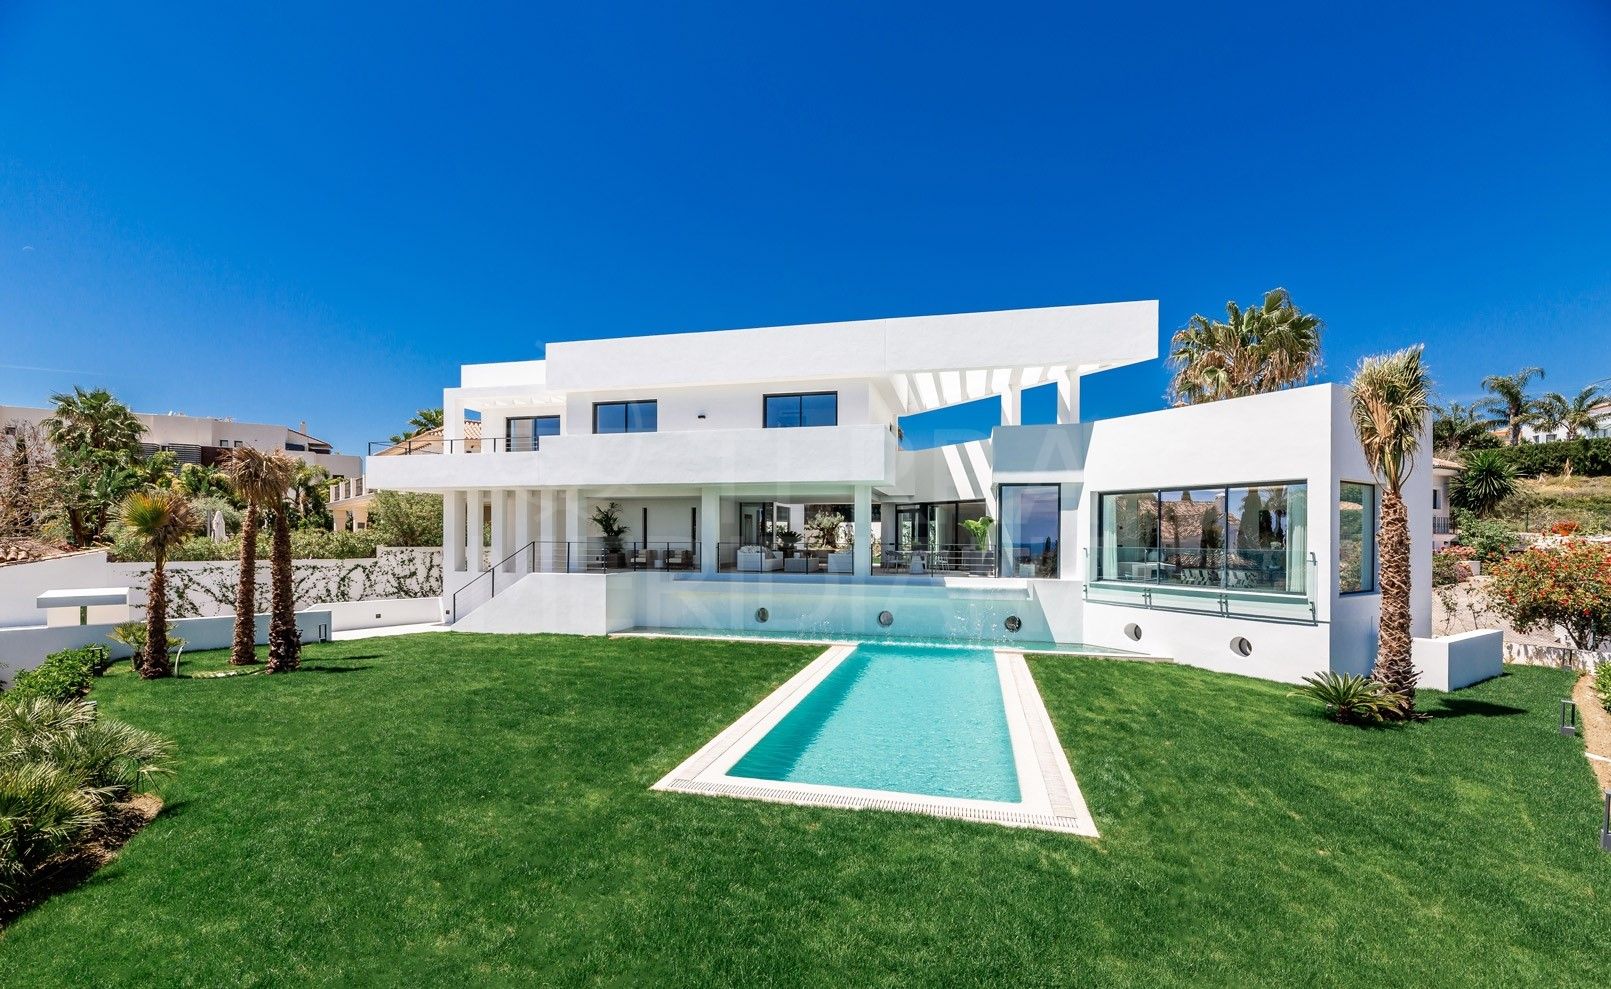 Magnificent contemporary style villa with 5 bedrooms and sea views for sale in Los Flamingos, Benahavis